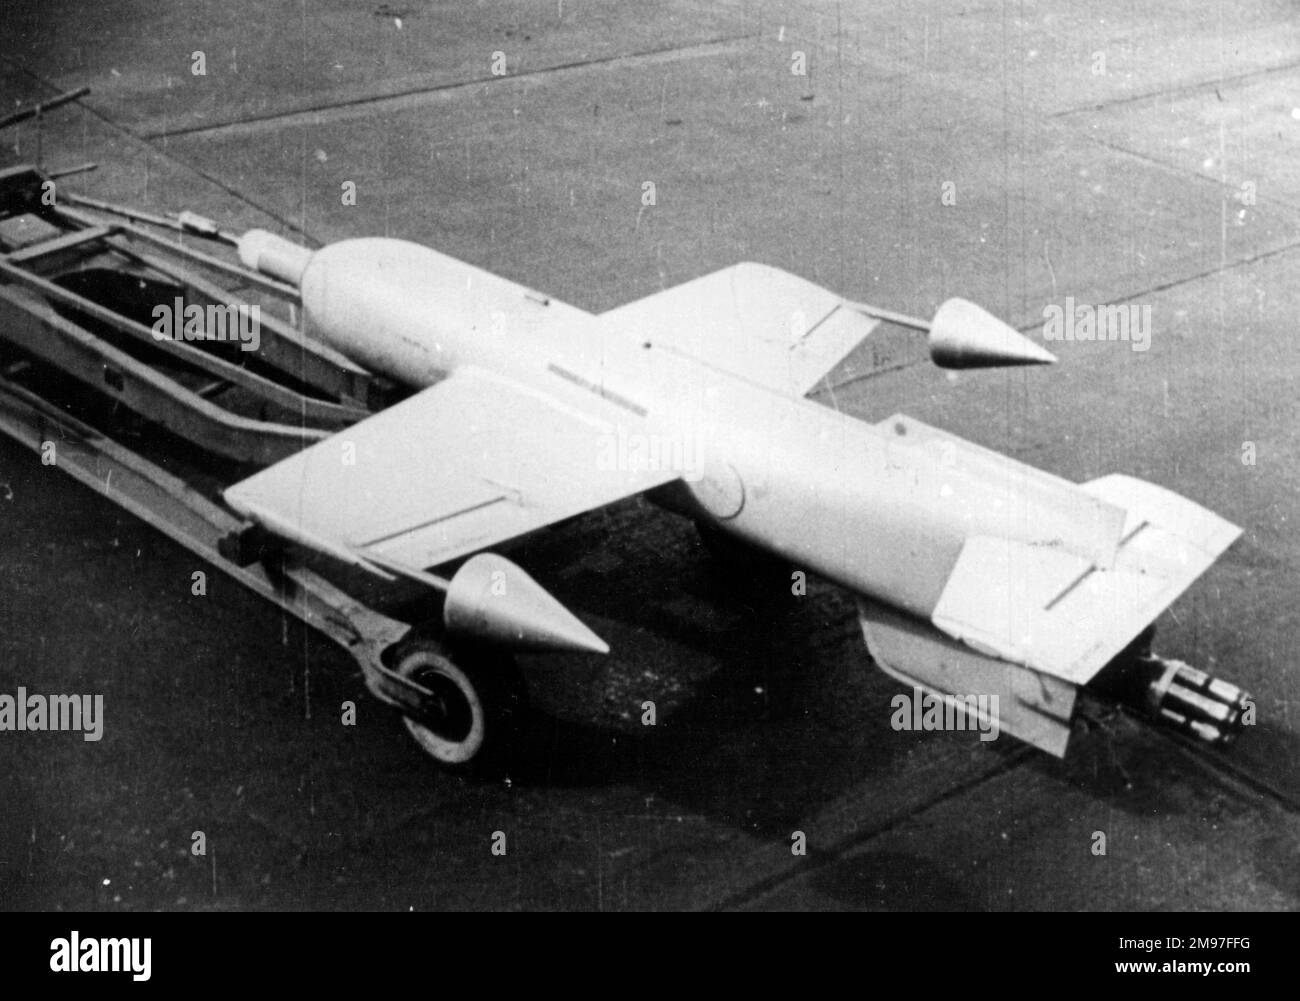 Henschel Hs 293 -seen on handling trolley, this was the world's first production air-launched anti-ship missile. Stock Photo